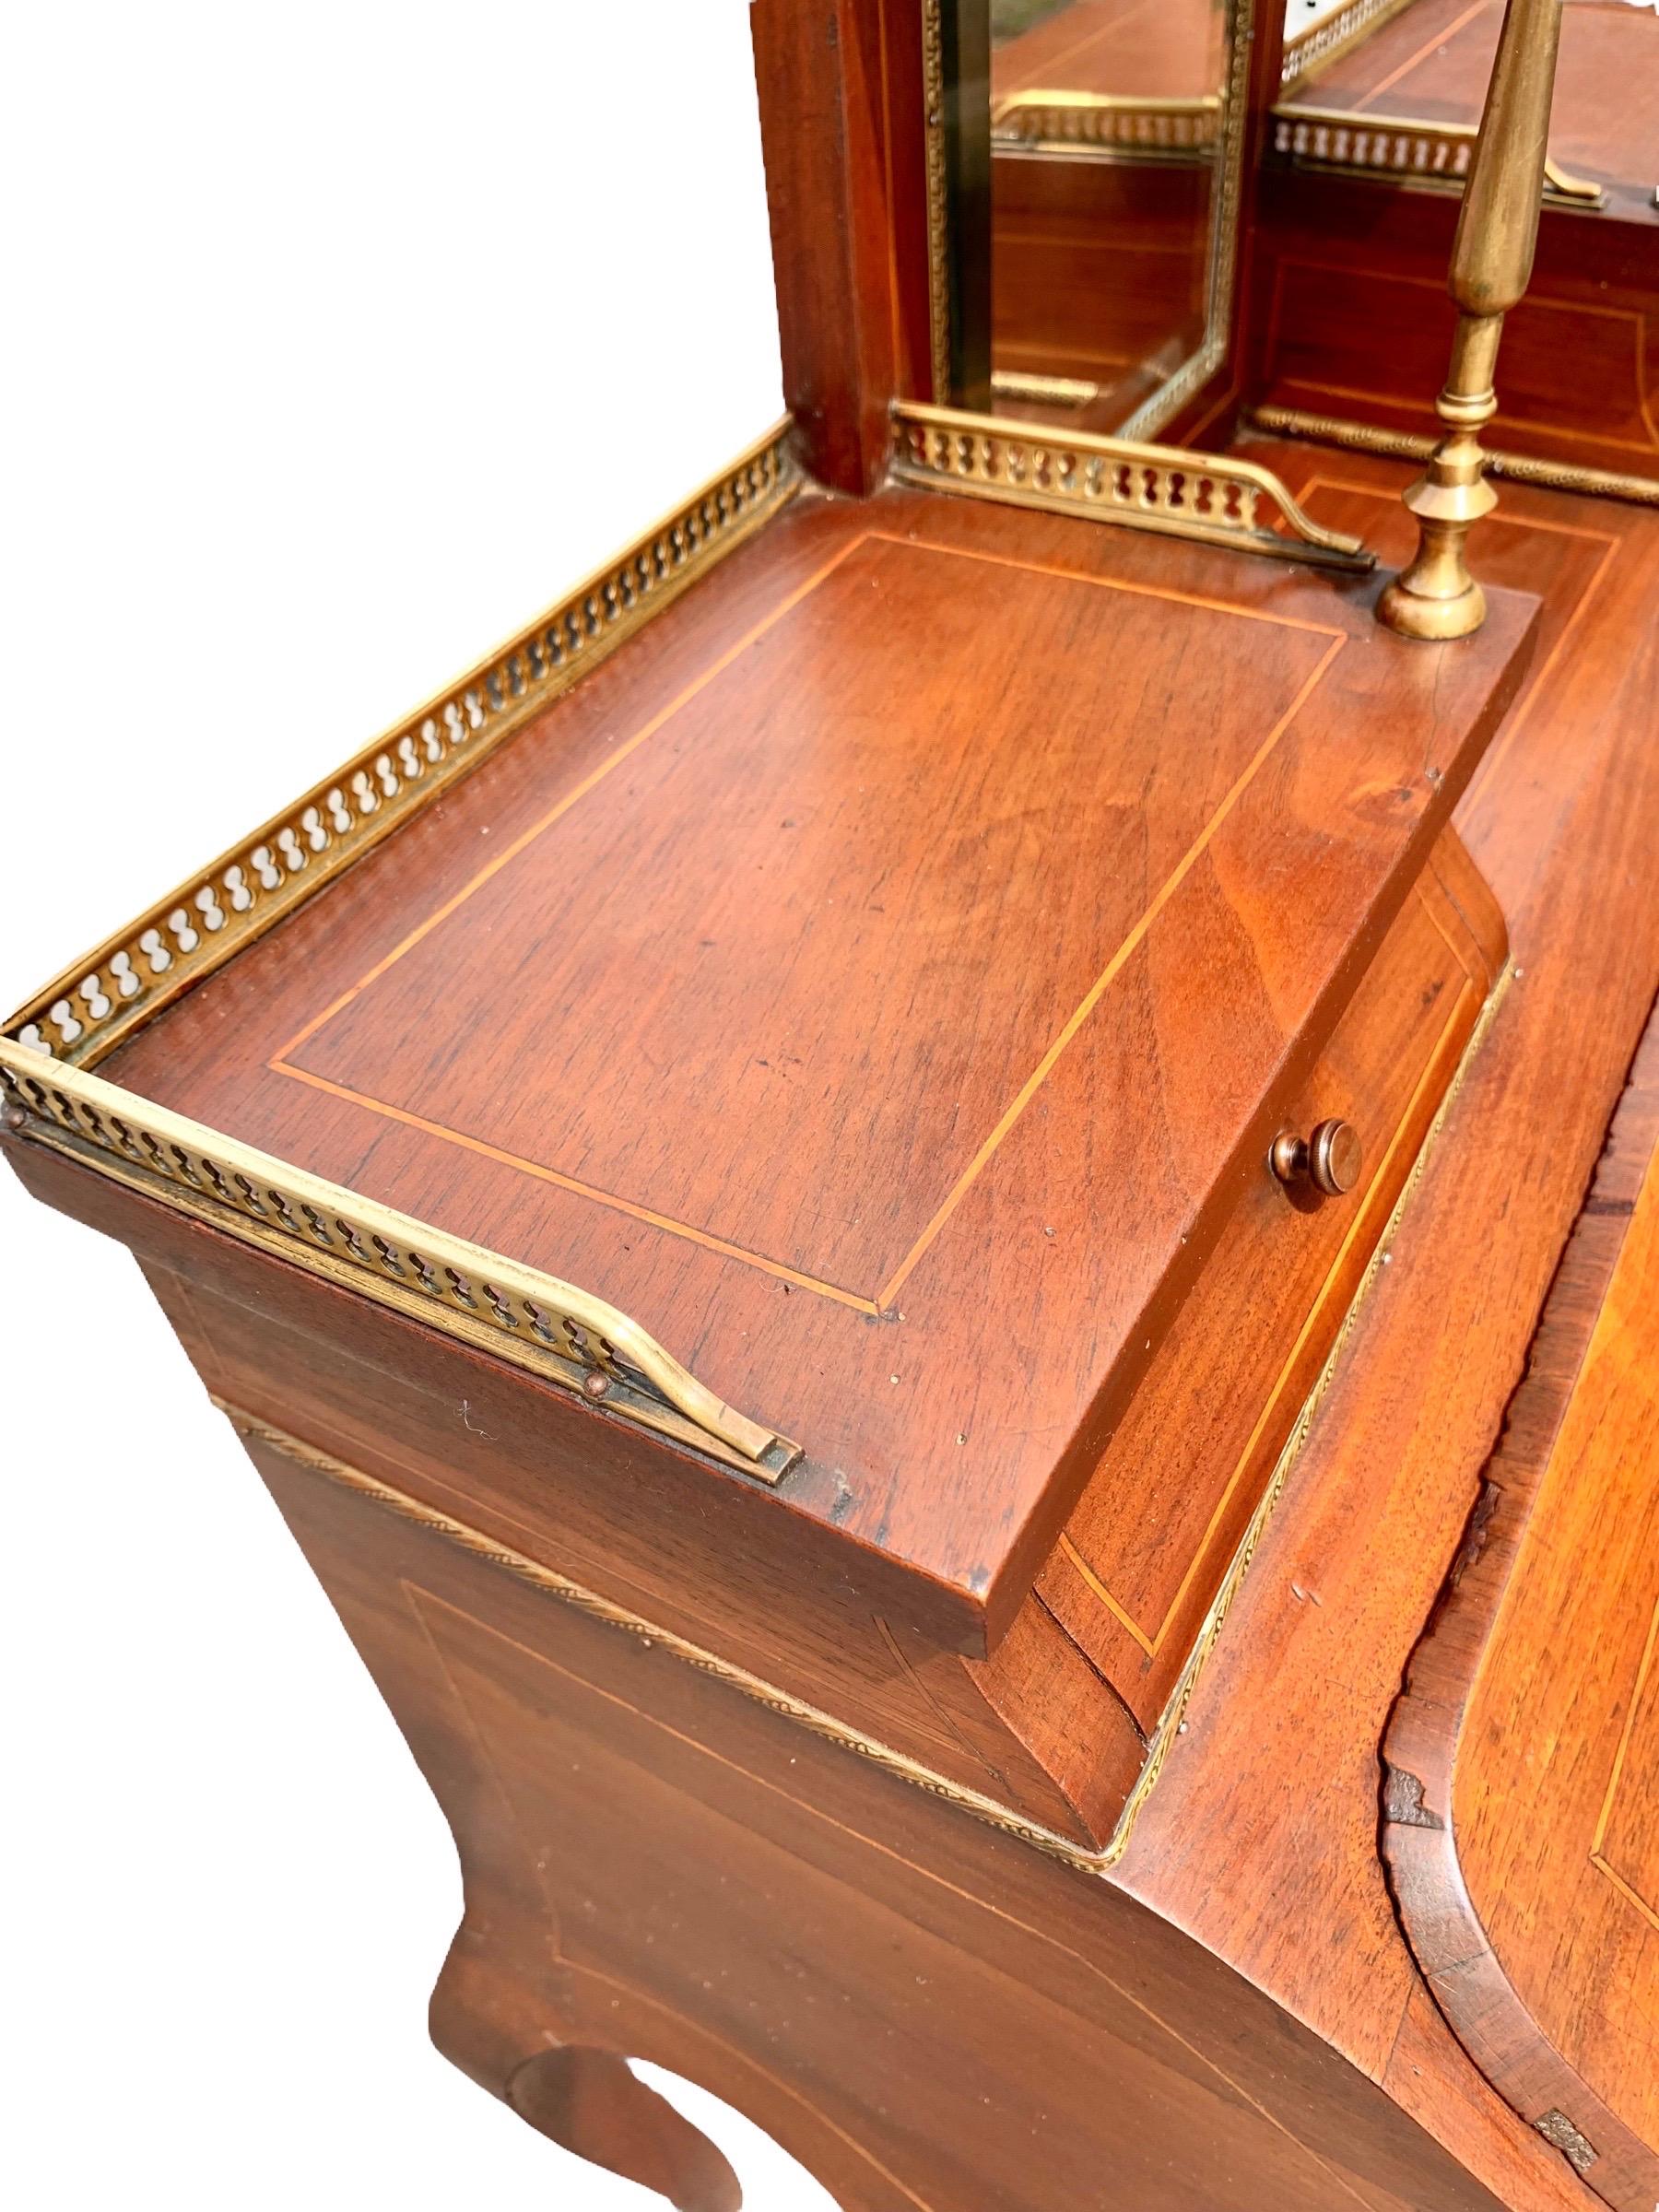 An antique French Louis XV style inlaid carved cherry Bonheur du Jour, 19th century with a raised brass galleried shelf above a wide beveled mirror back, flanked by two small brass galleried serpentine drawers over a marquetry inlaid slant front